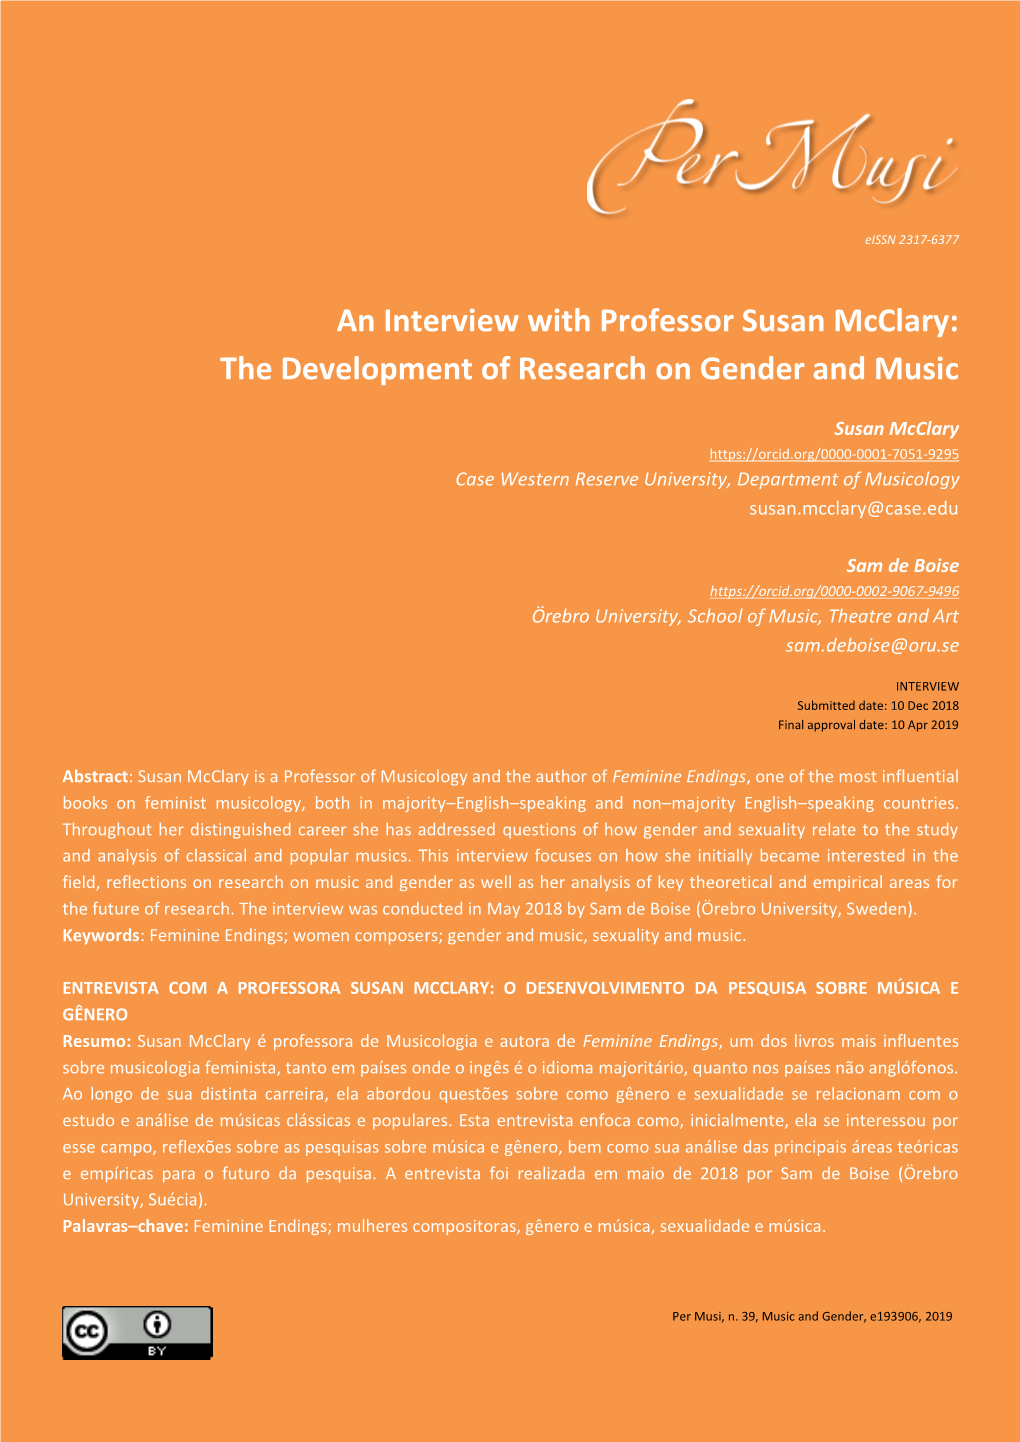 An Interview with Professor Susan Mcclary: the Development of Research on Gender and Music